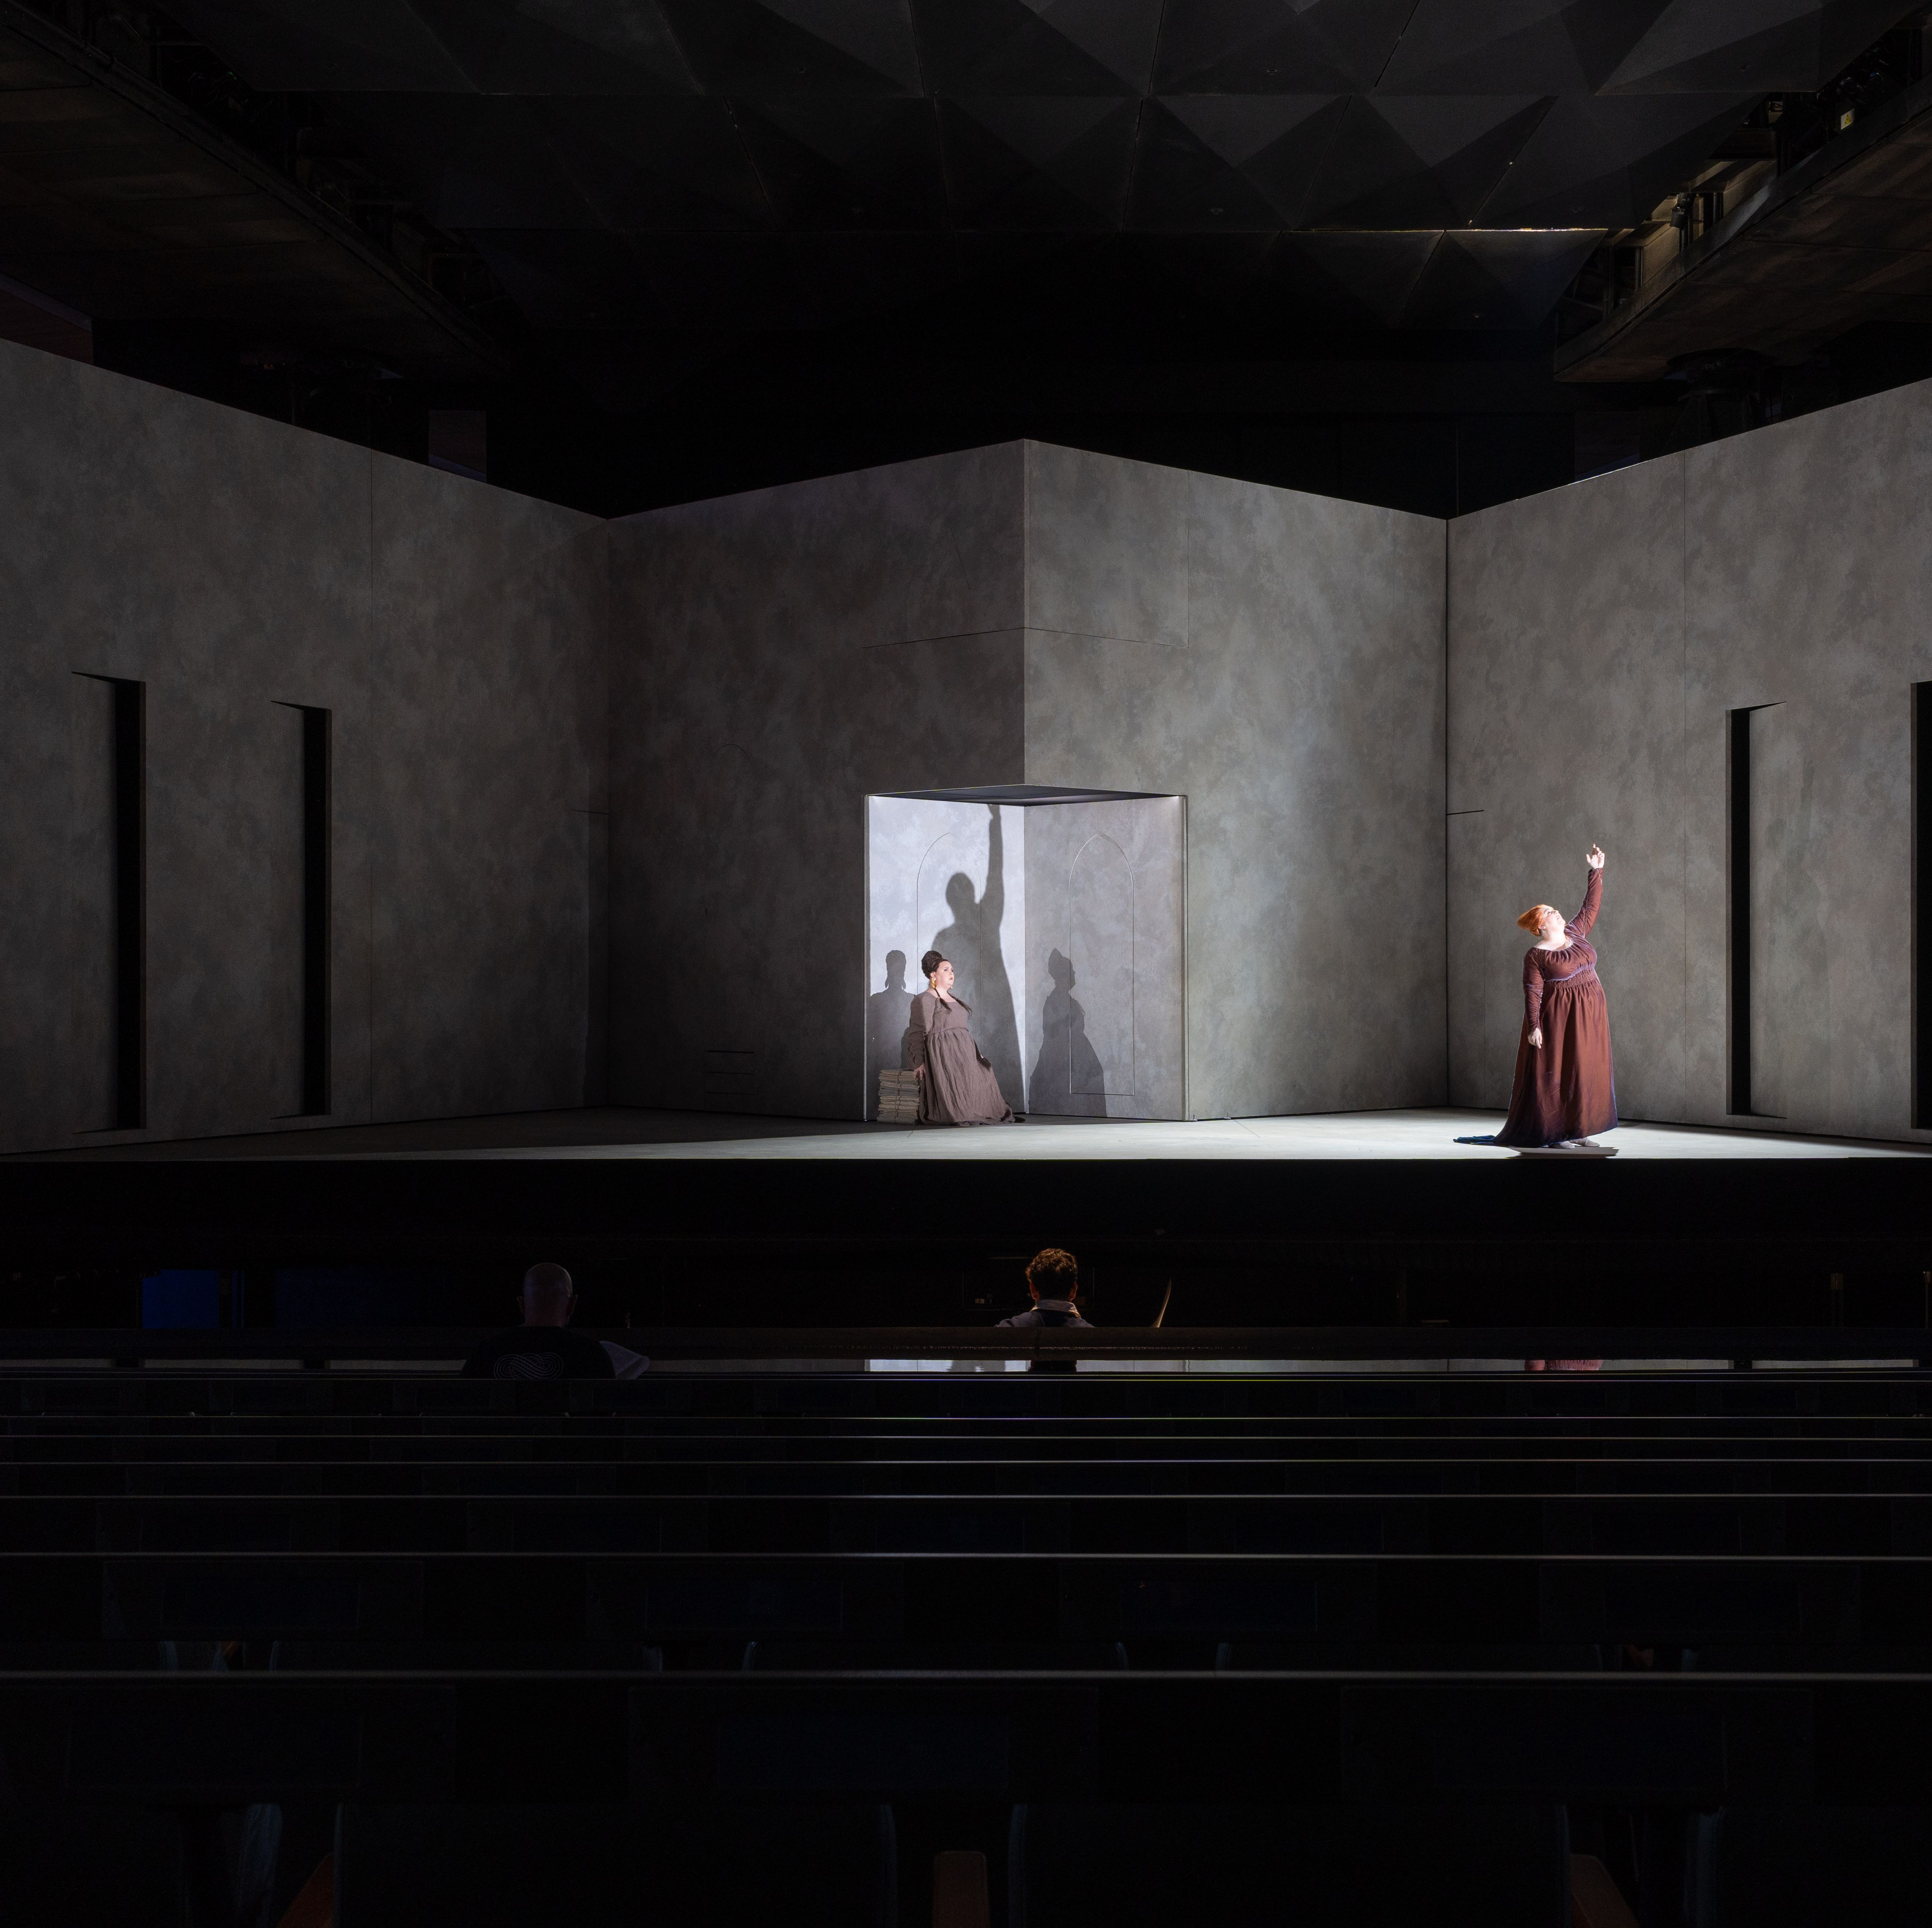 How Charlap Hyman & Herrero Created the Ethereal Sets of 'Tristan und Isolde'